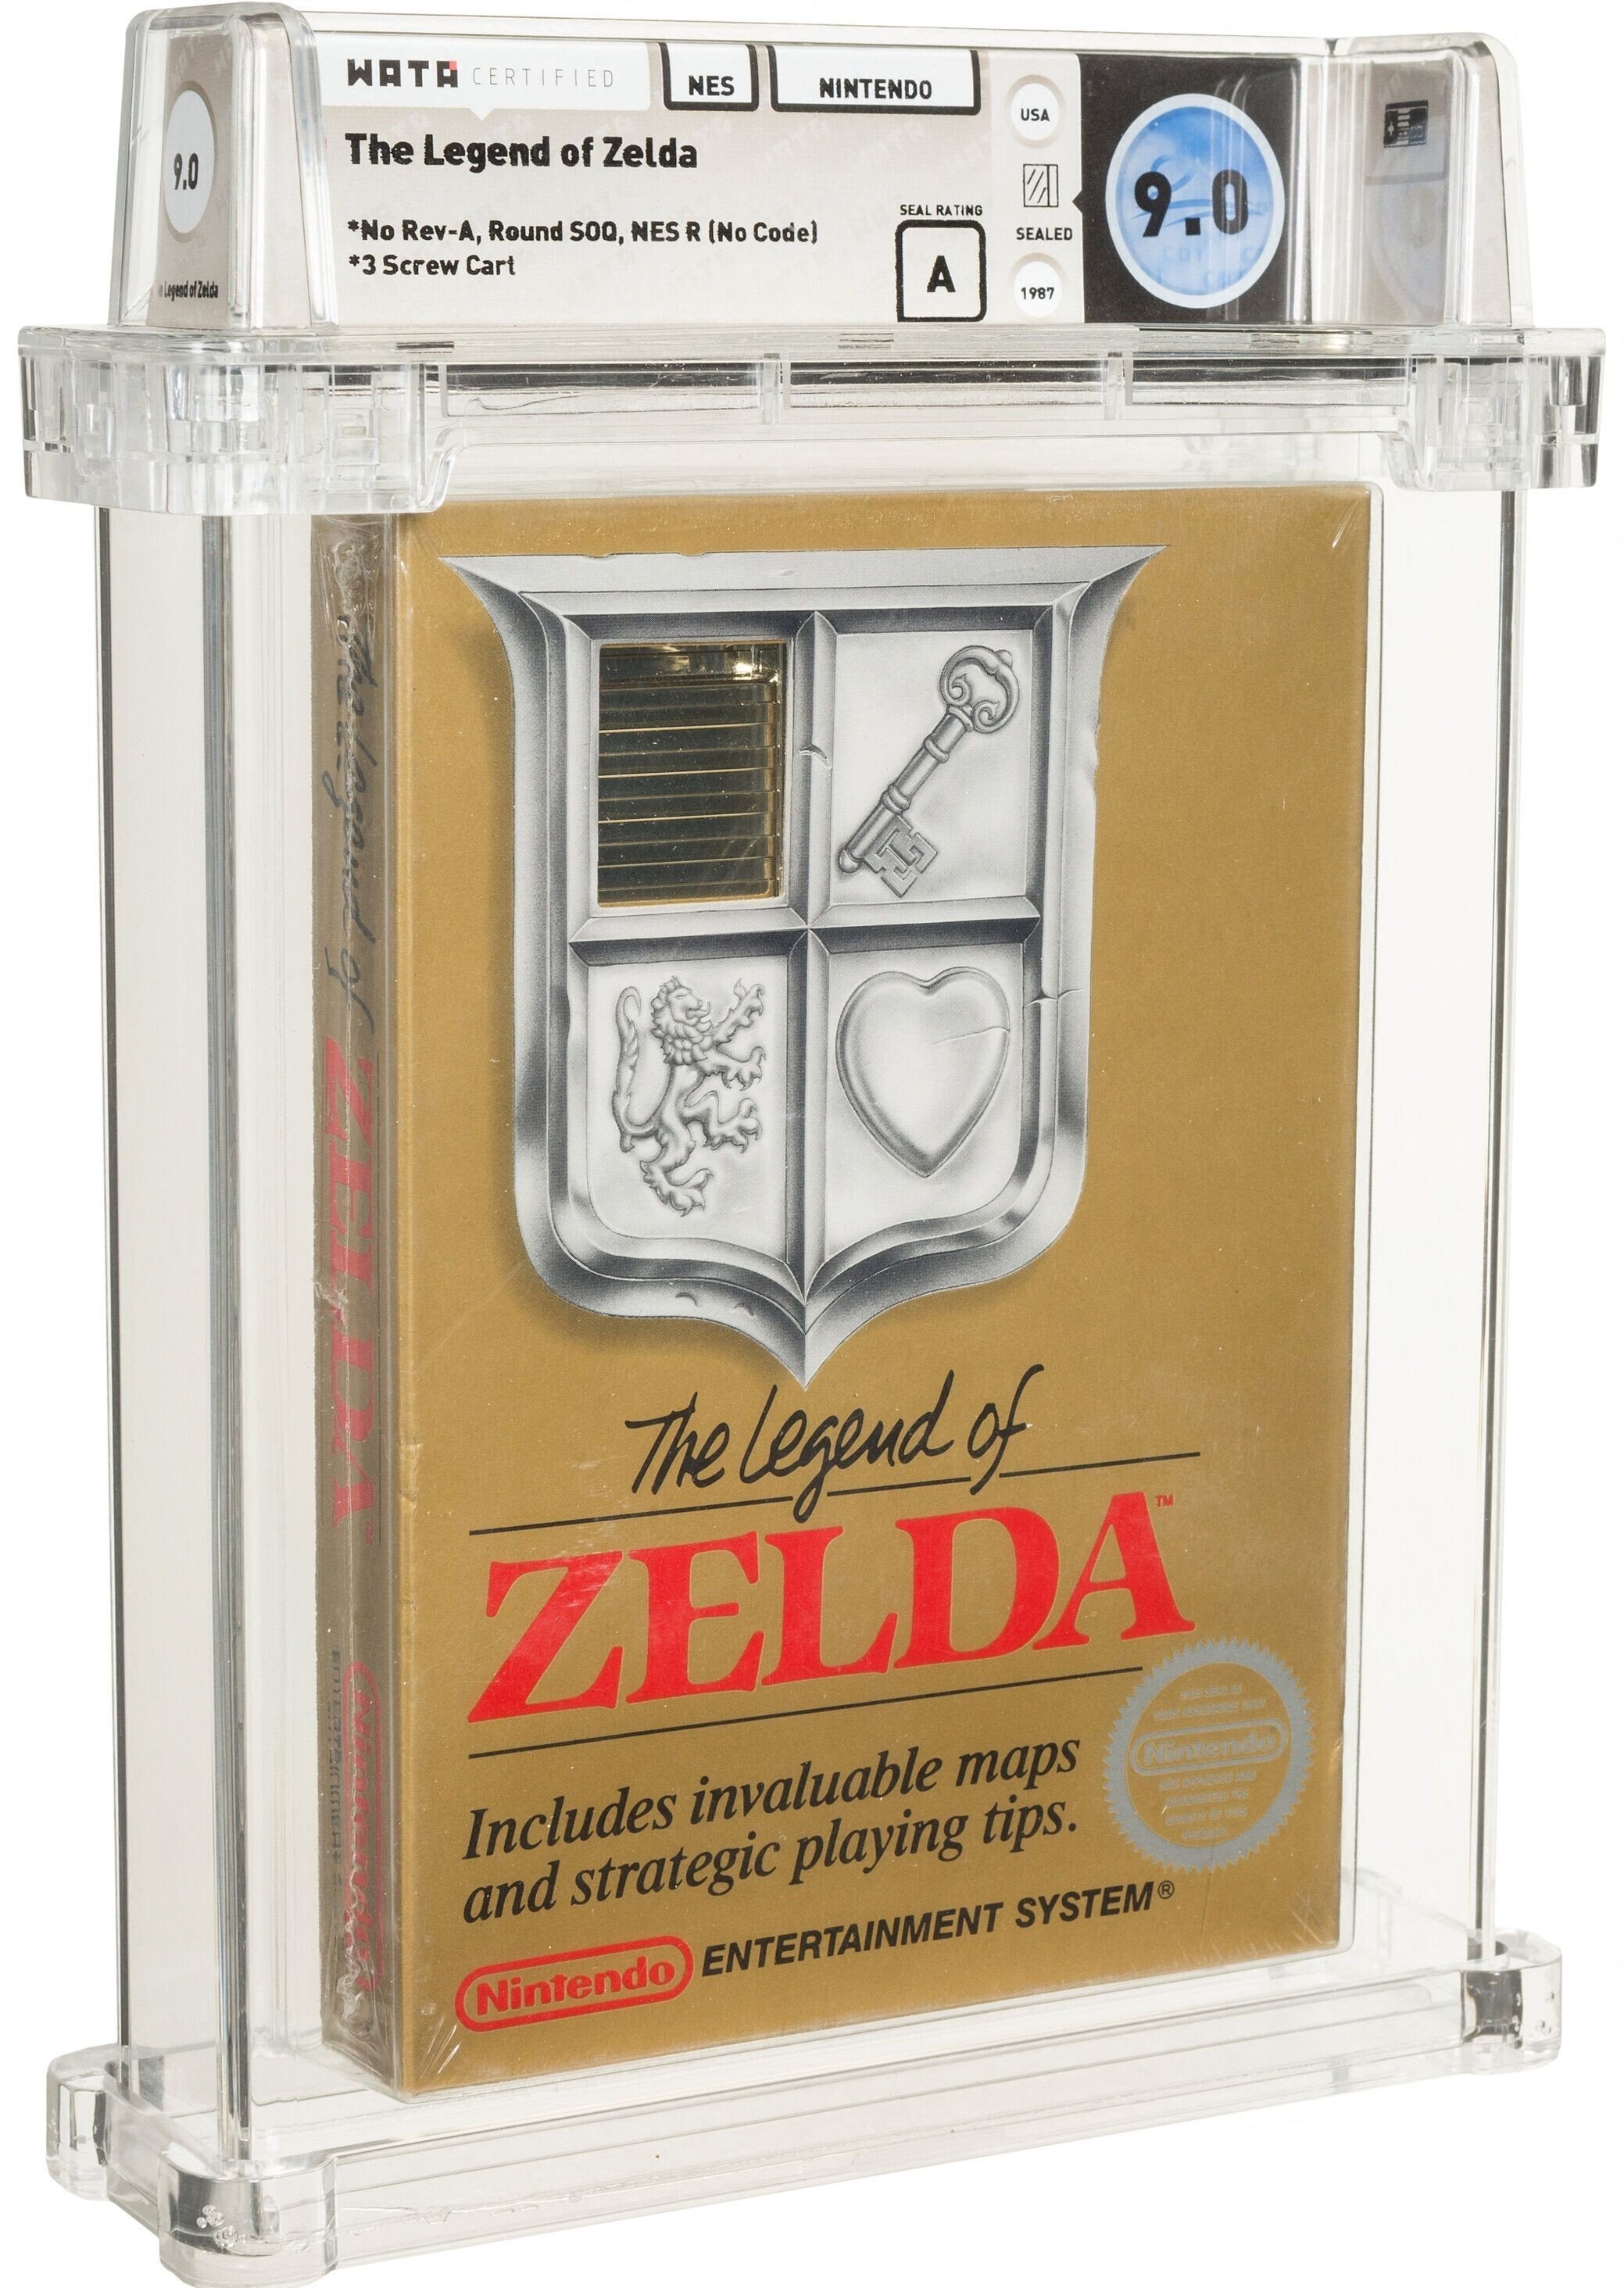 A sealed copy of the Nintendo NES game The Legend of Zelda has sold at auction for US$870,000, auction house Heritage Auctions announced Photo: Heritage Auctions / AFP